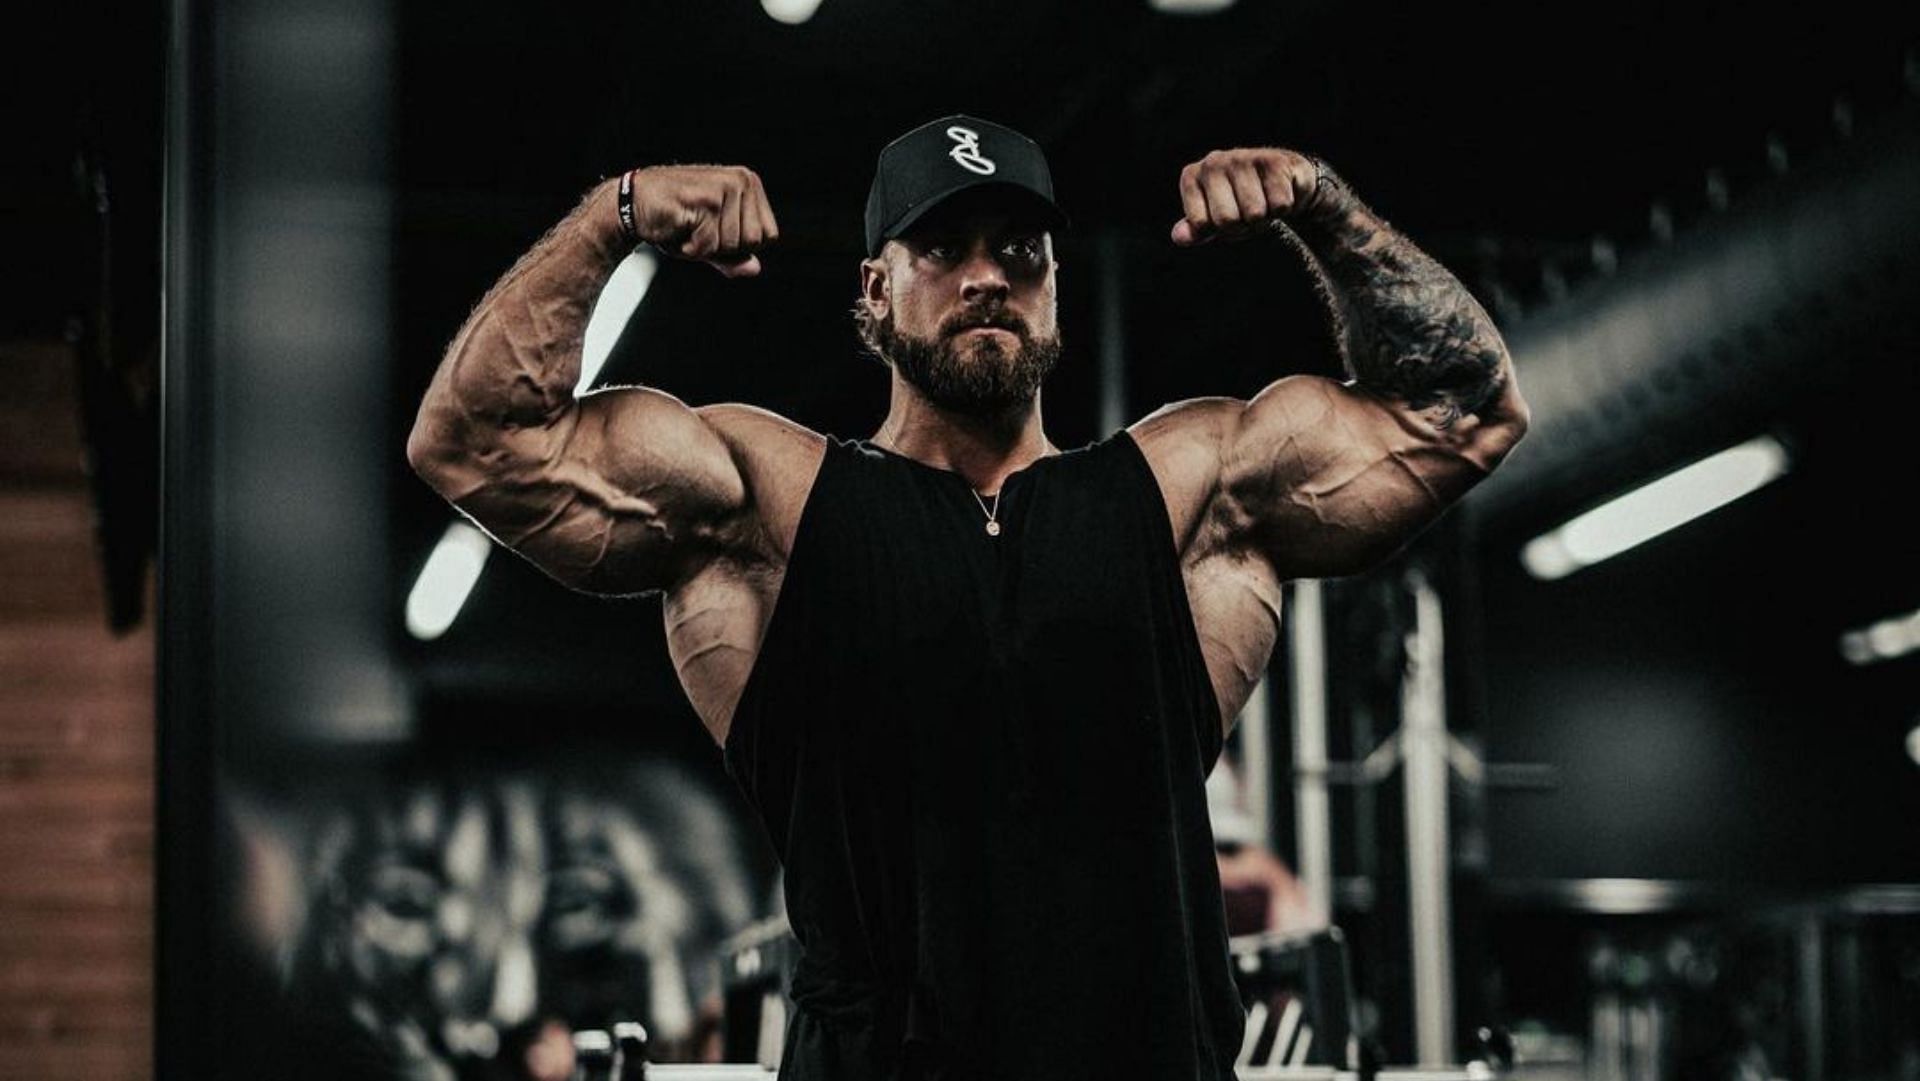 God-like Chris Bumstead Nips | Ripped body, Bodybuilding pictures,  Bodybuilding